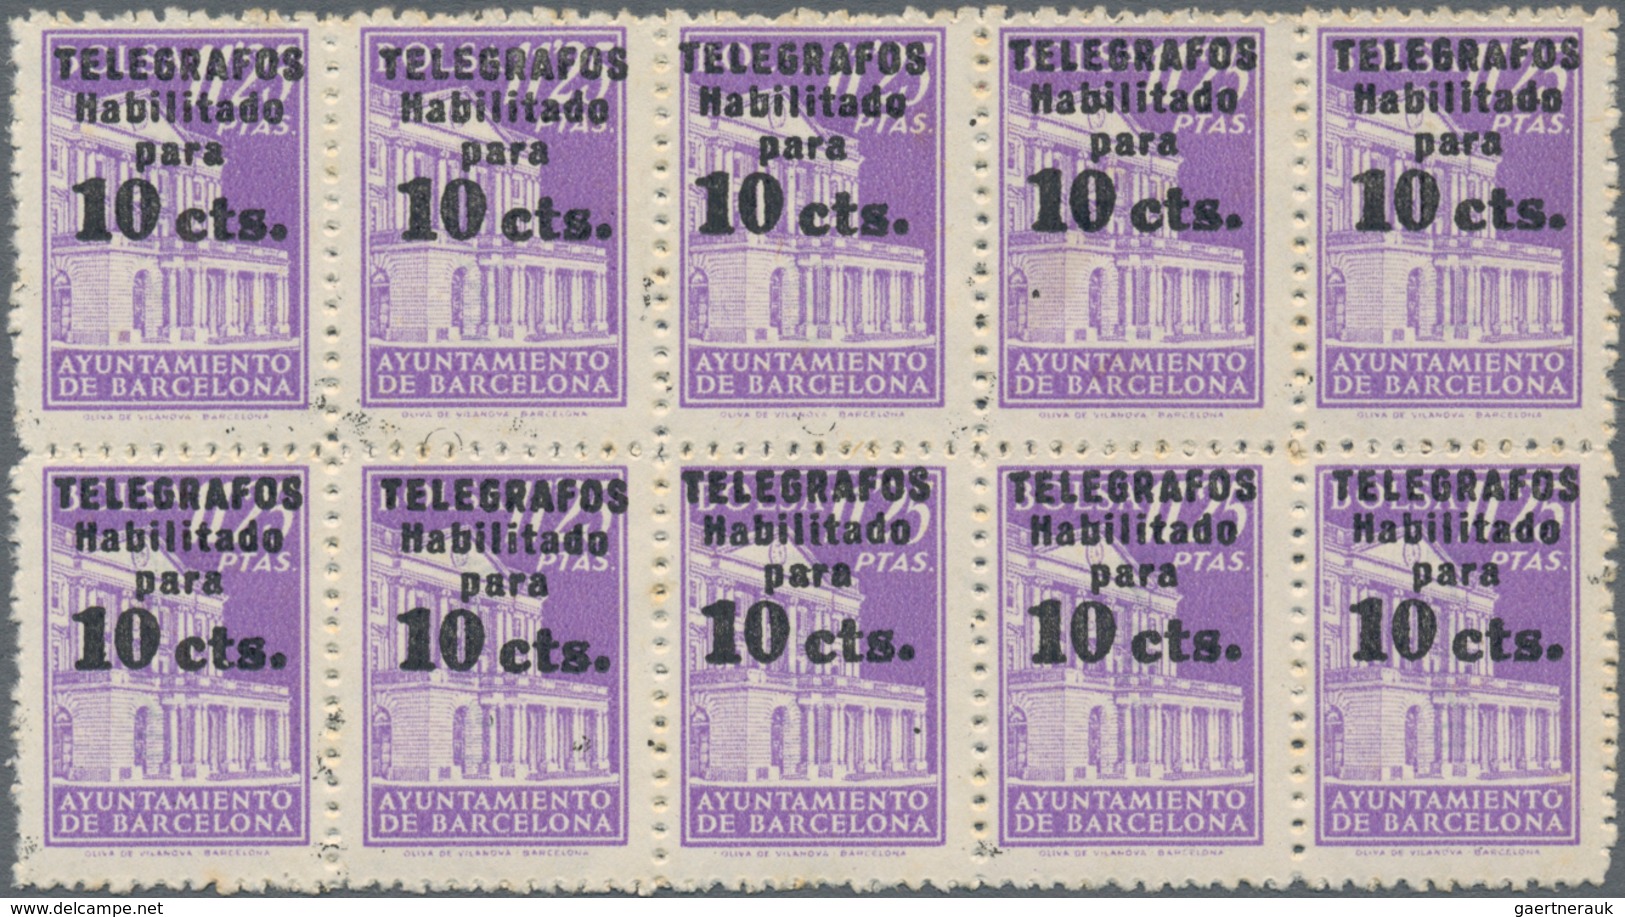 Spanien: 1930/1945 (ca.), unusual large accumulation BACK OF THE BOOK ISSUES mostly on stockcards in